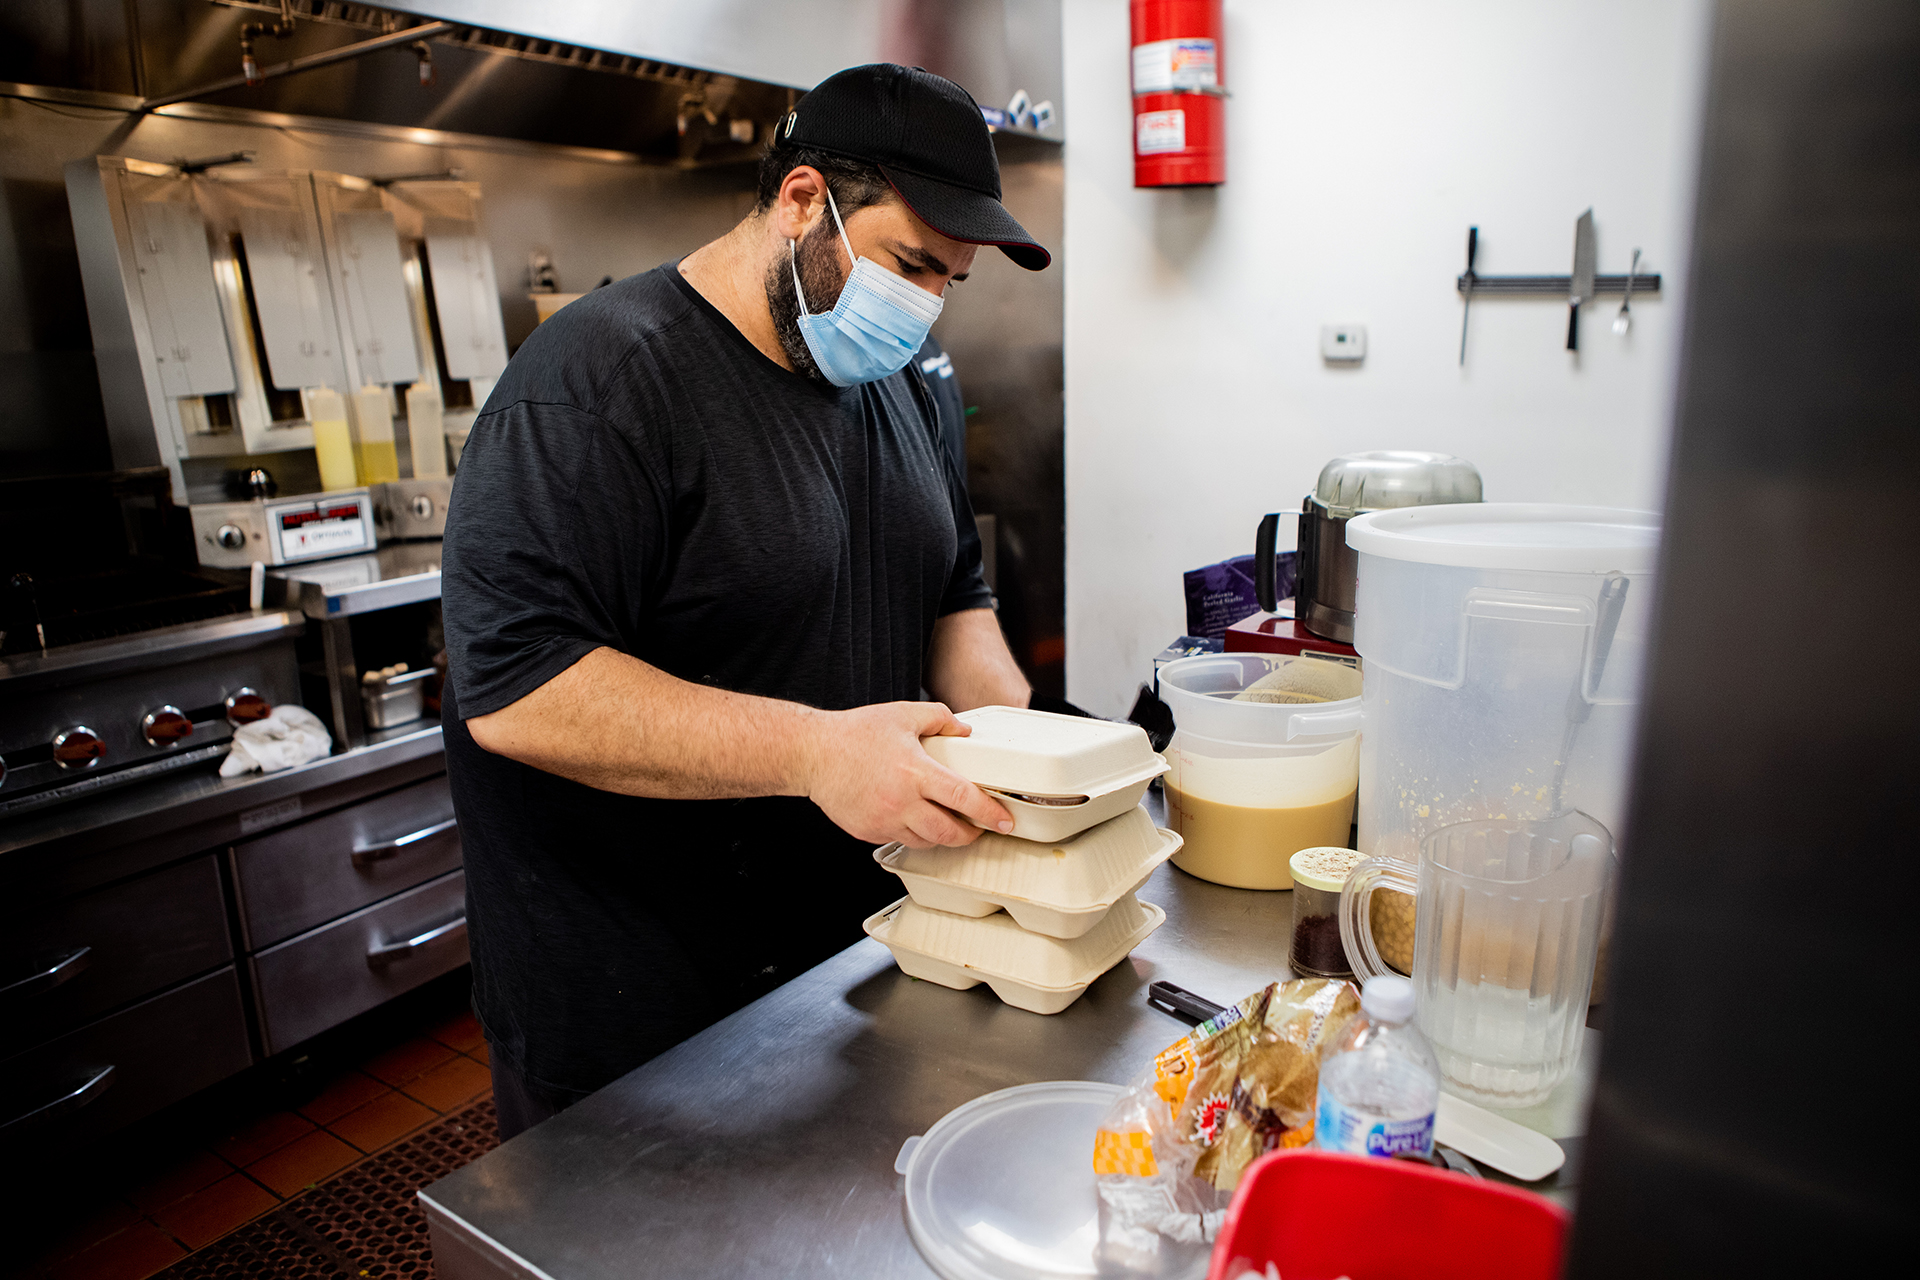 In the Hummus Labs kitchen, chef Joseph Badaro is pictured wearing a black shirt,  black hat and a light blue mask. Chef is preparing orders on a metalic table top. The stove top and Shawarma broilers are visible in the background.